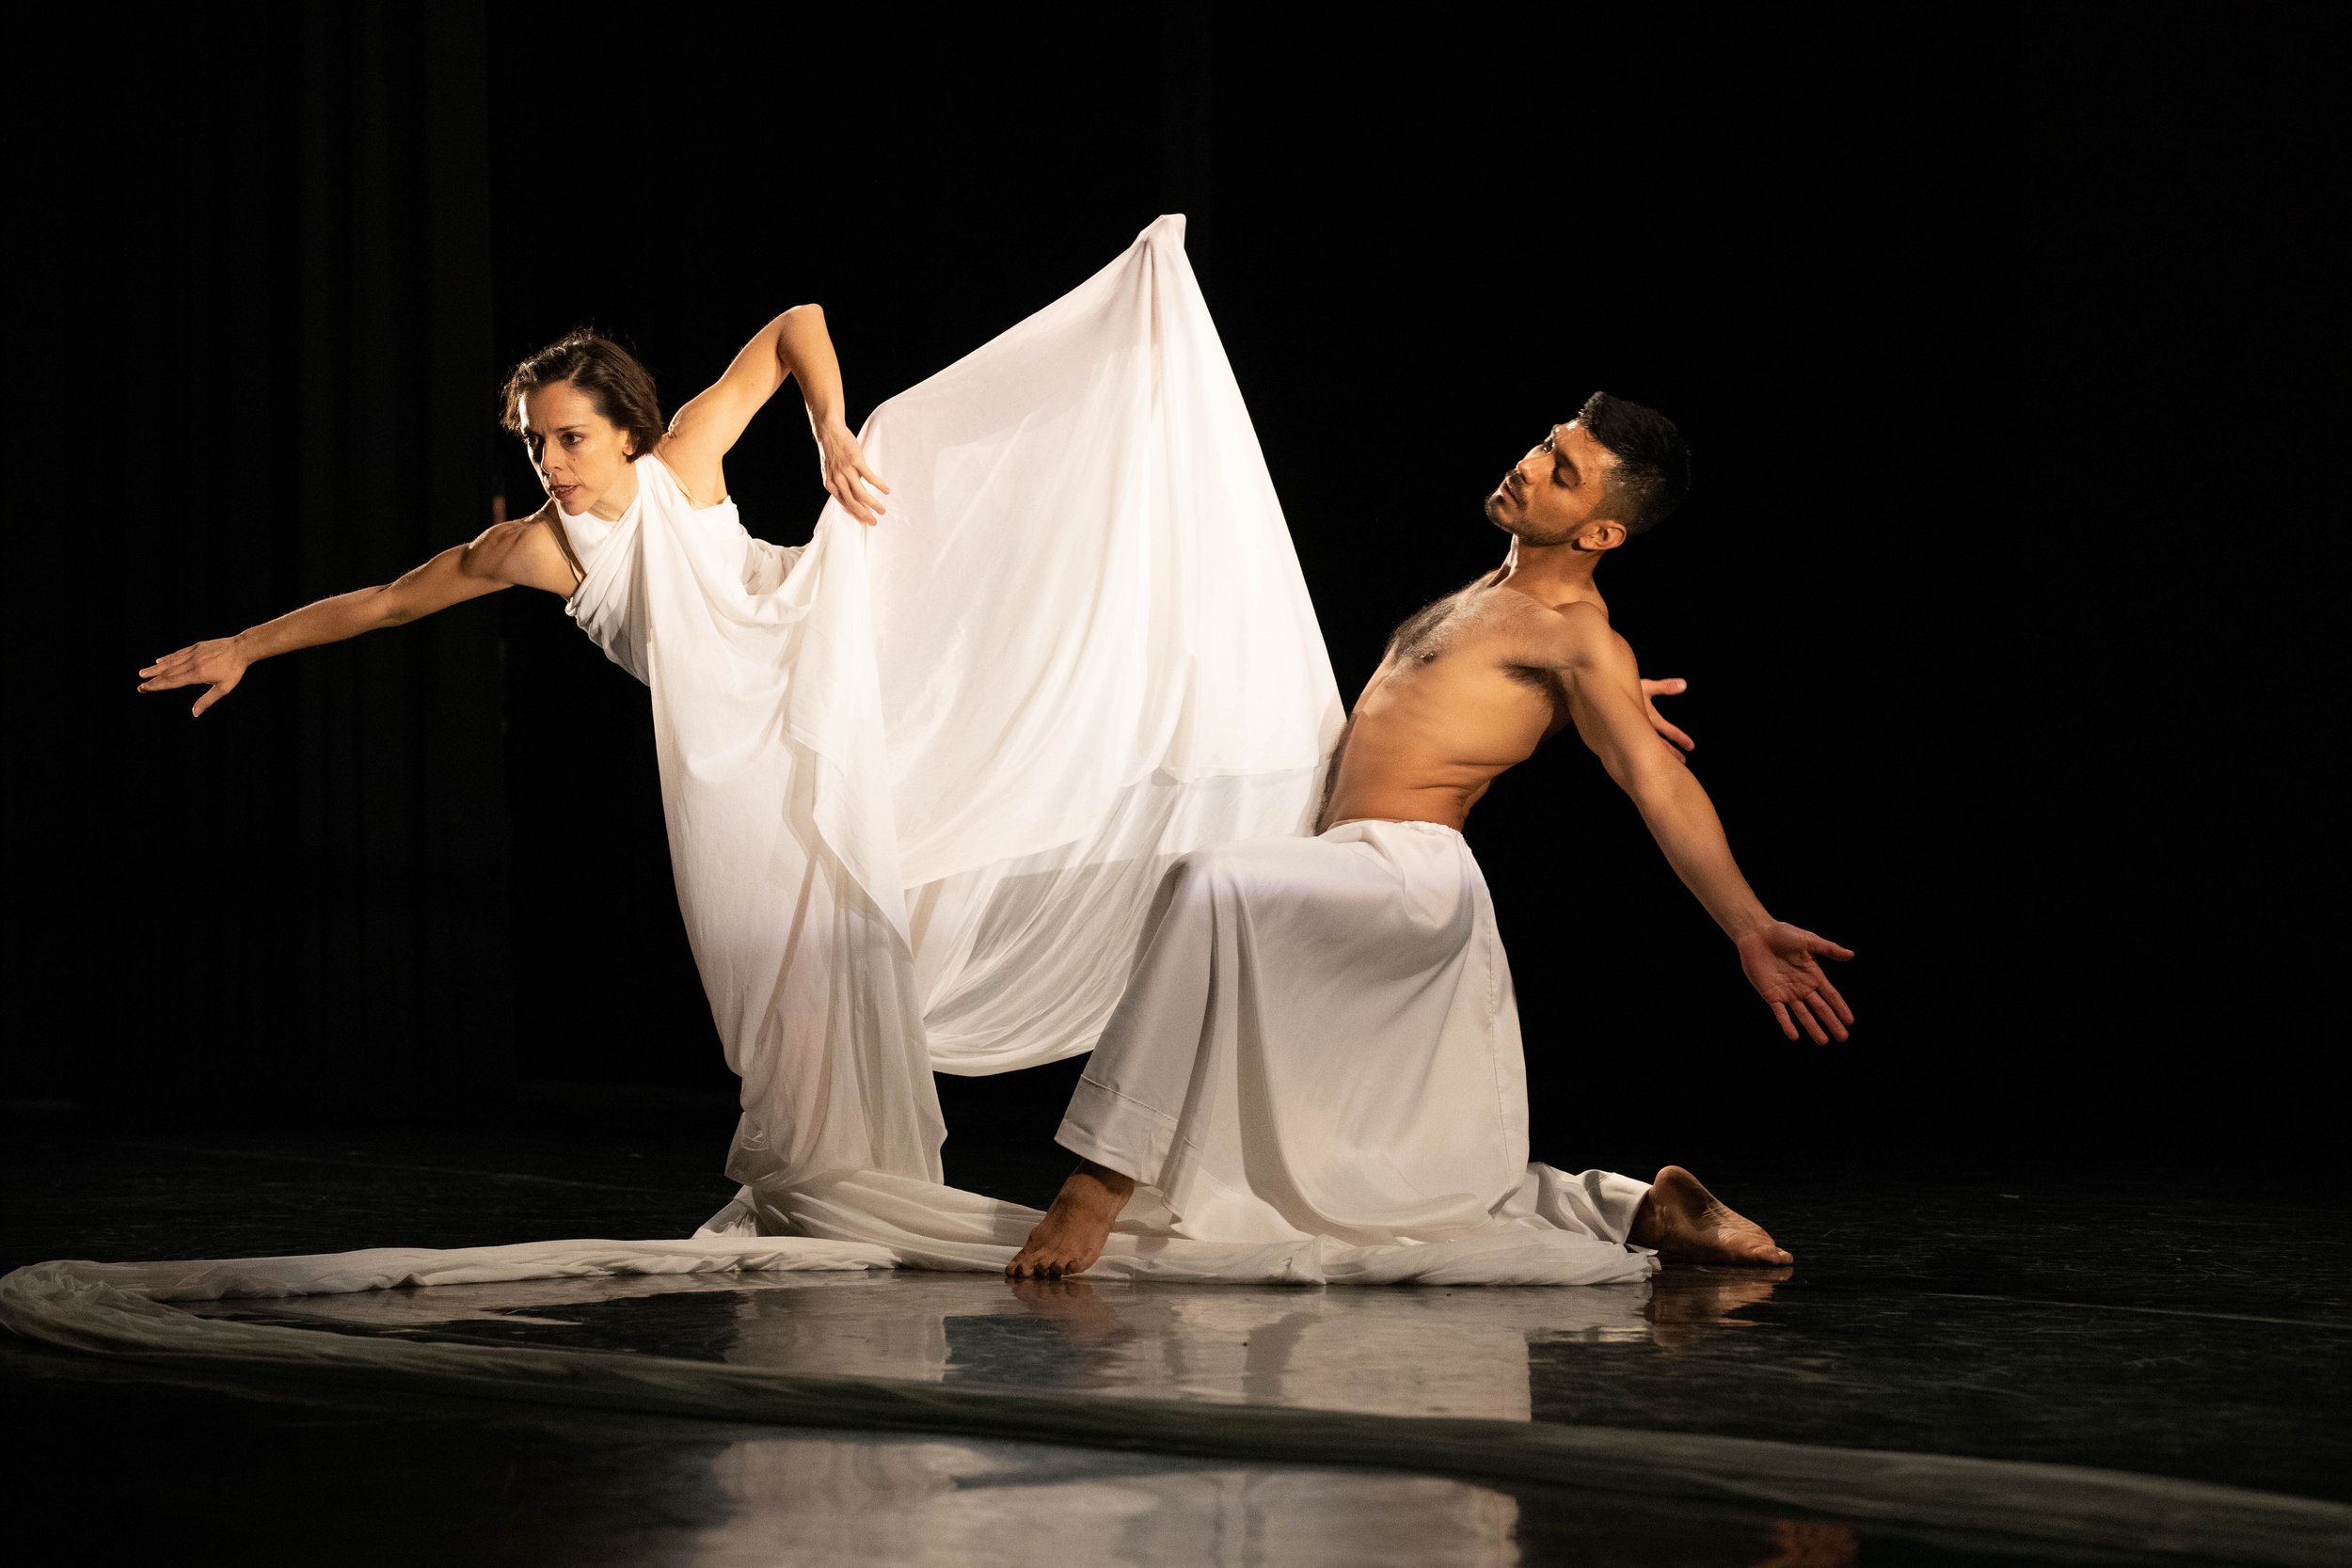  SMC students perform world dance styles with the Global Motion World Dance Company during the live performance at The Broad Theater in Santa Monica, Calif. This company provides a platform for the students to experience and learn about other culture